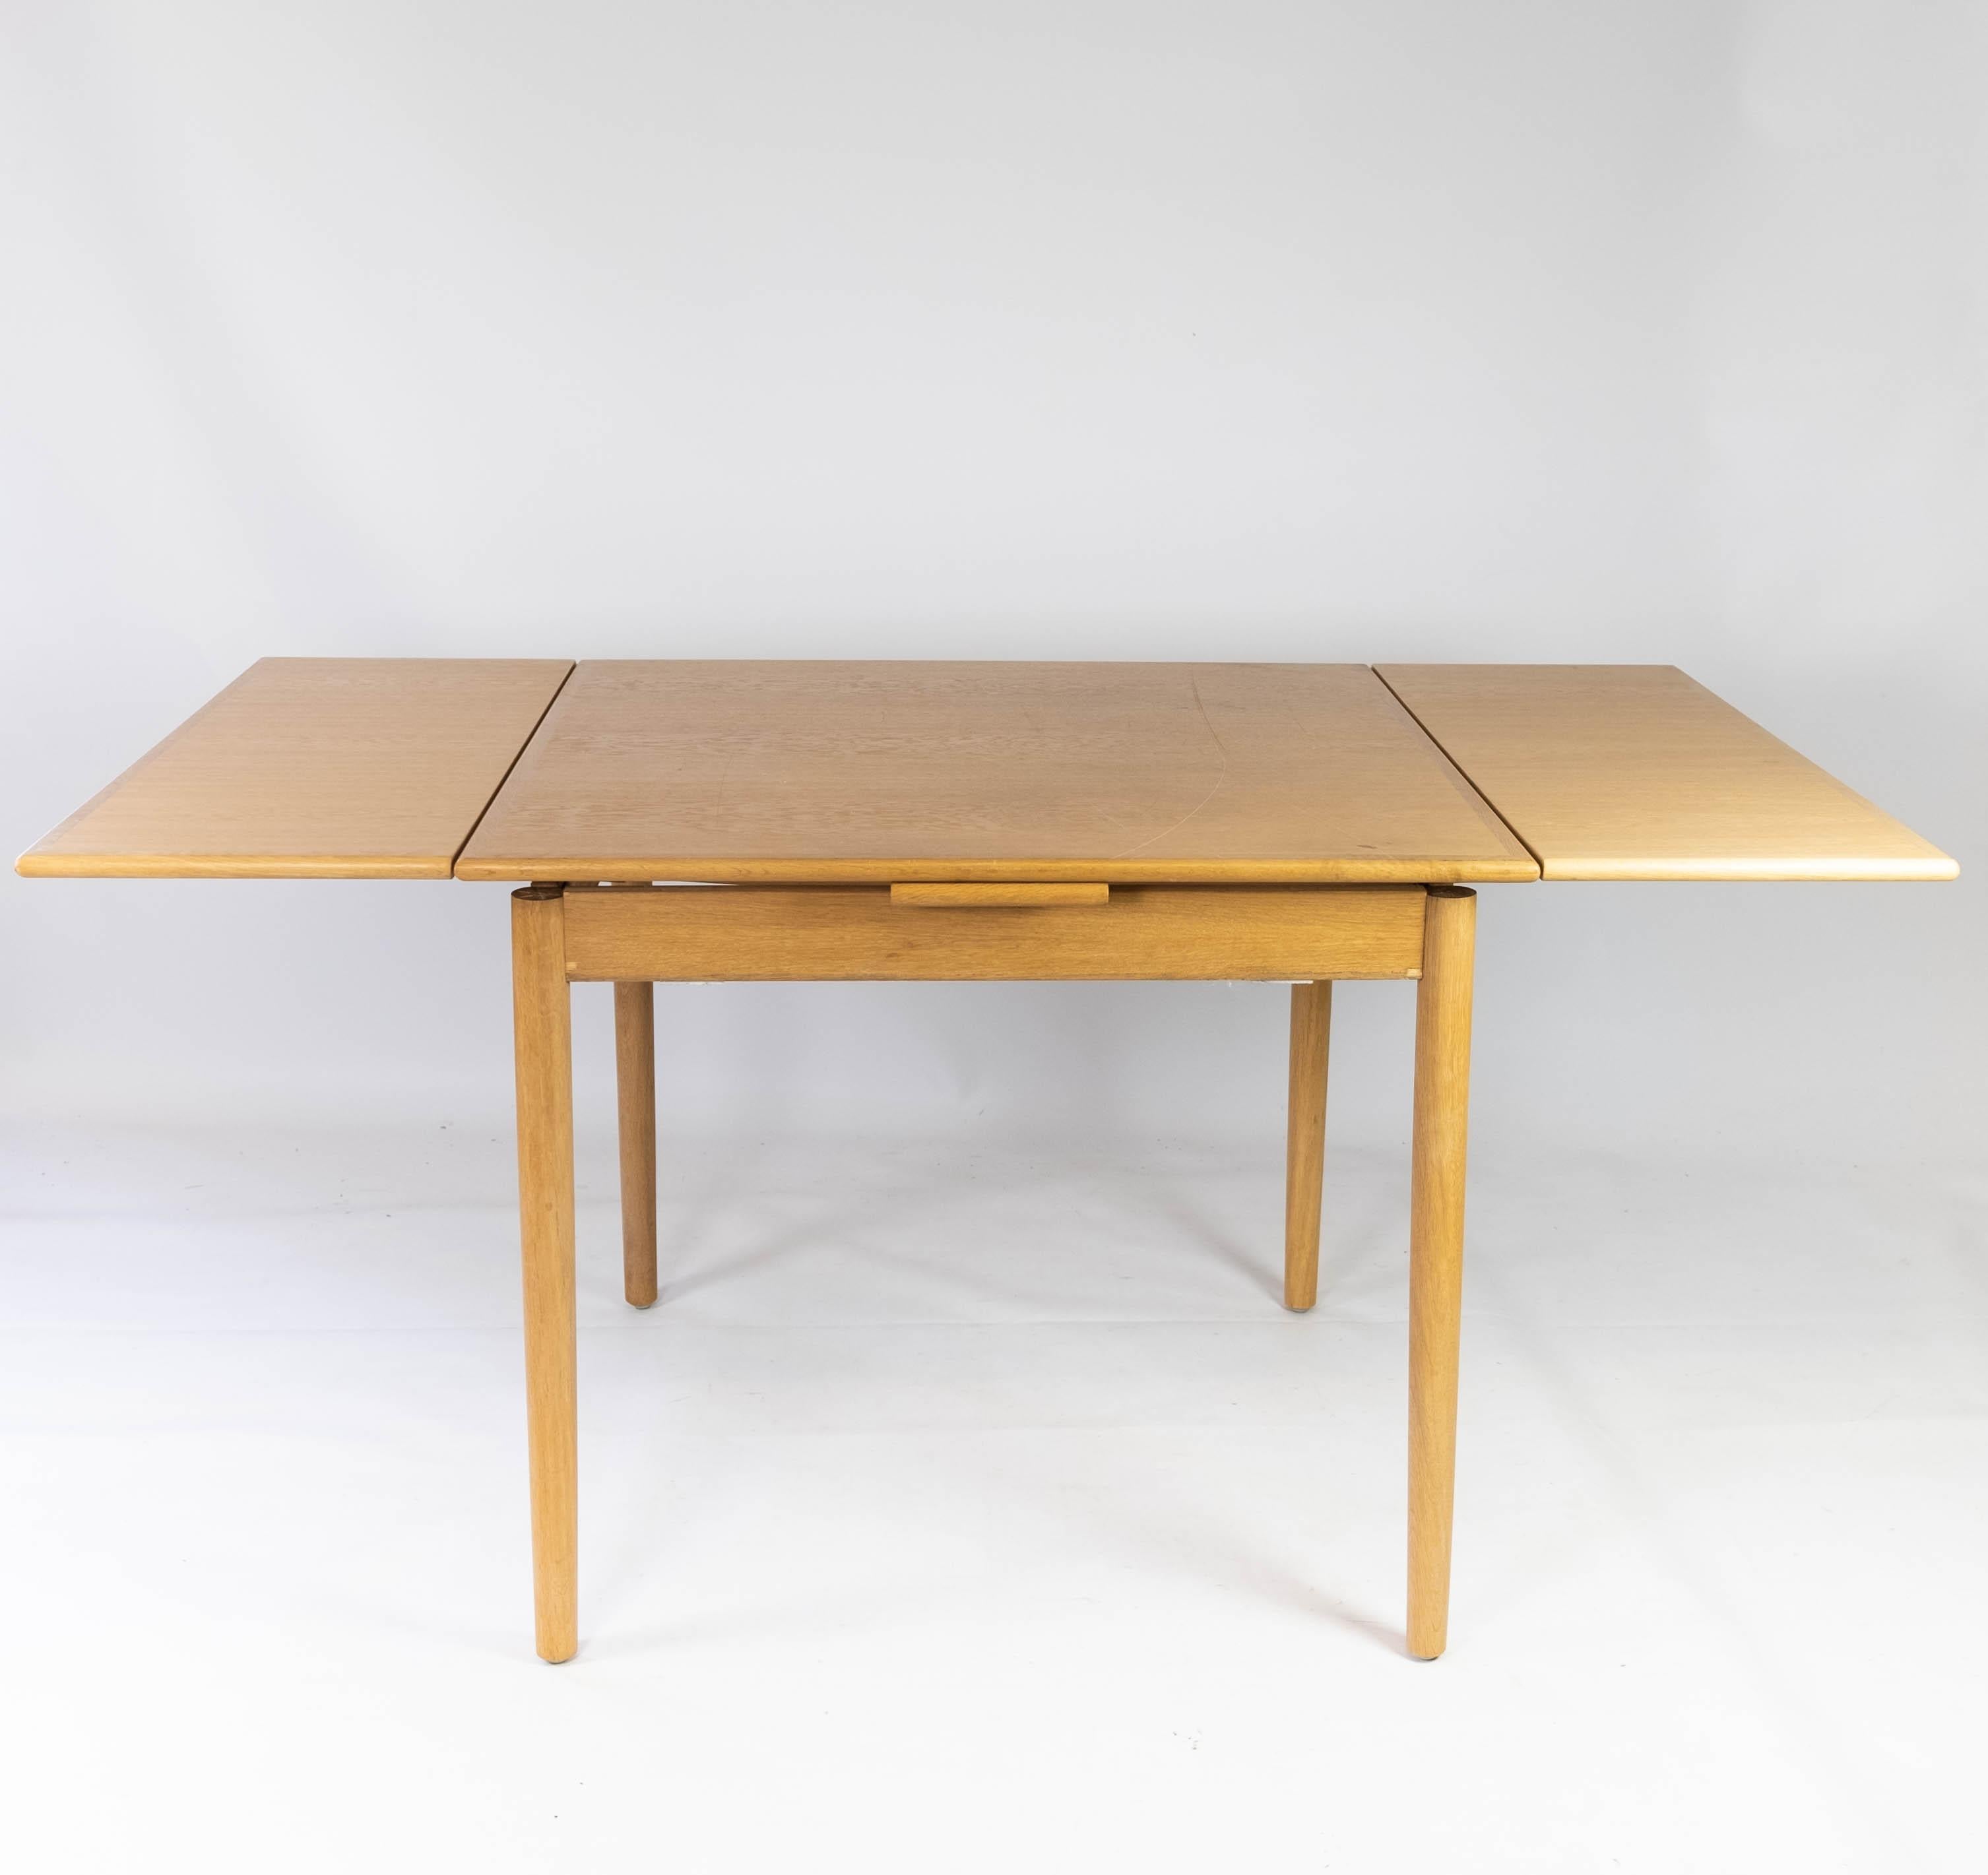 Dining Table Made In Oak With Extensions, Danish Design From 1960s For Sale 1